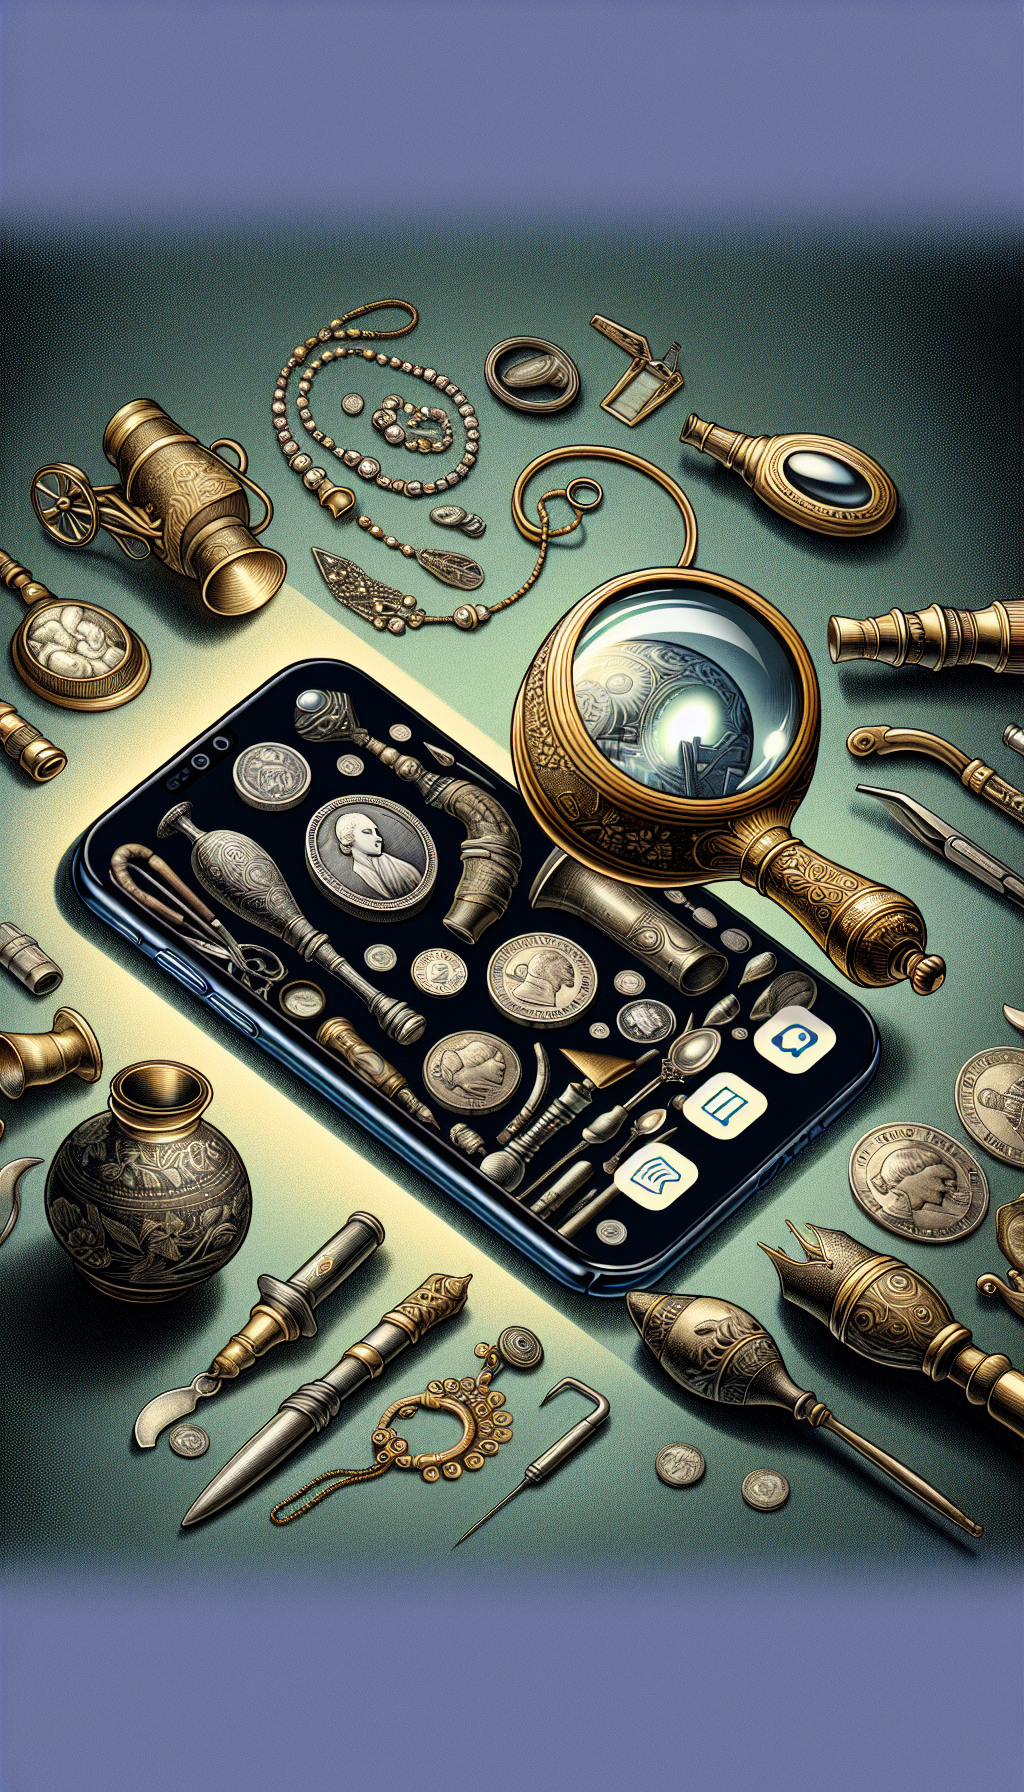 An illustration showcasing an elegantly aged magnifying glass, which transforms into a sleek smartphone toward the handle, peering over a collection of antique items like jewelry, coins, and vases. On the phone's screen, a user-friendly app interface displays estimated values and historical data. The merging of old and modern elements highlights the fusion of traditional antiquing with contemporary technology.